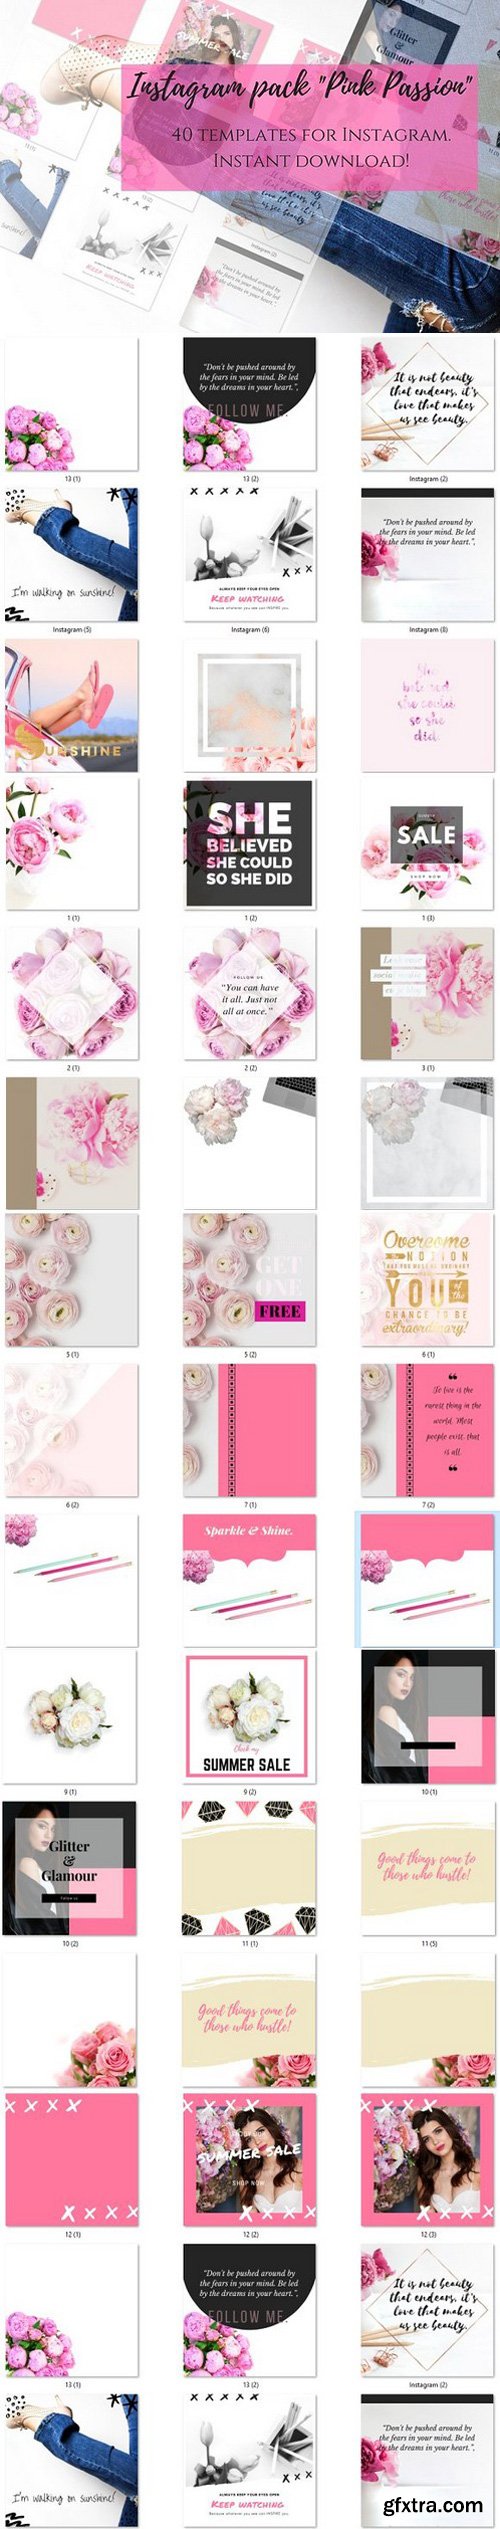 Instagram pack Pink Passion